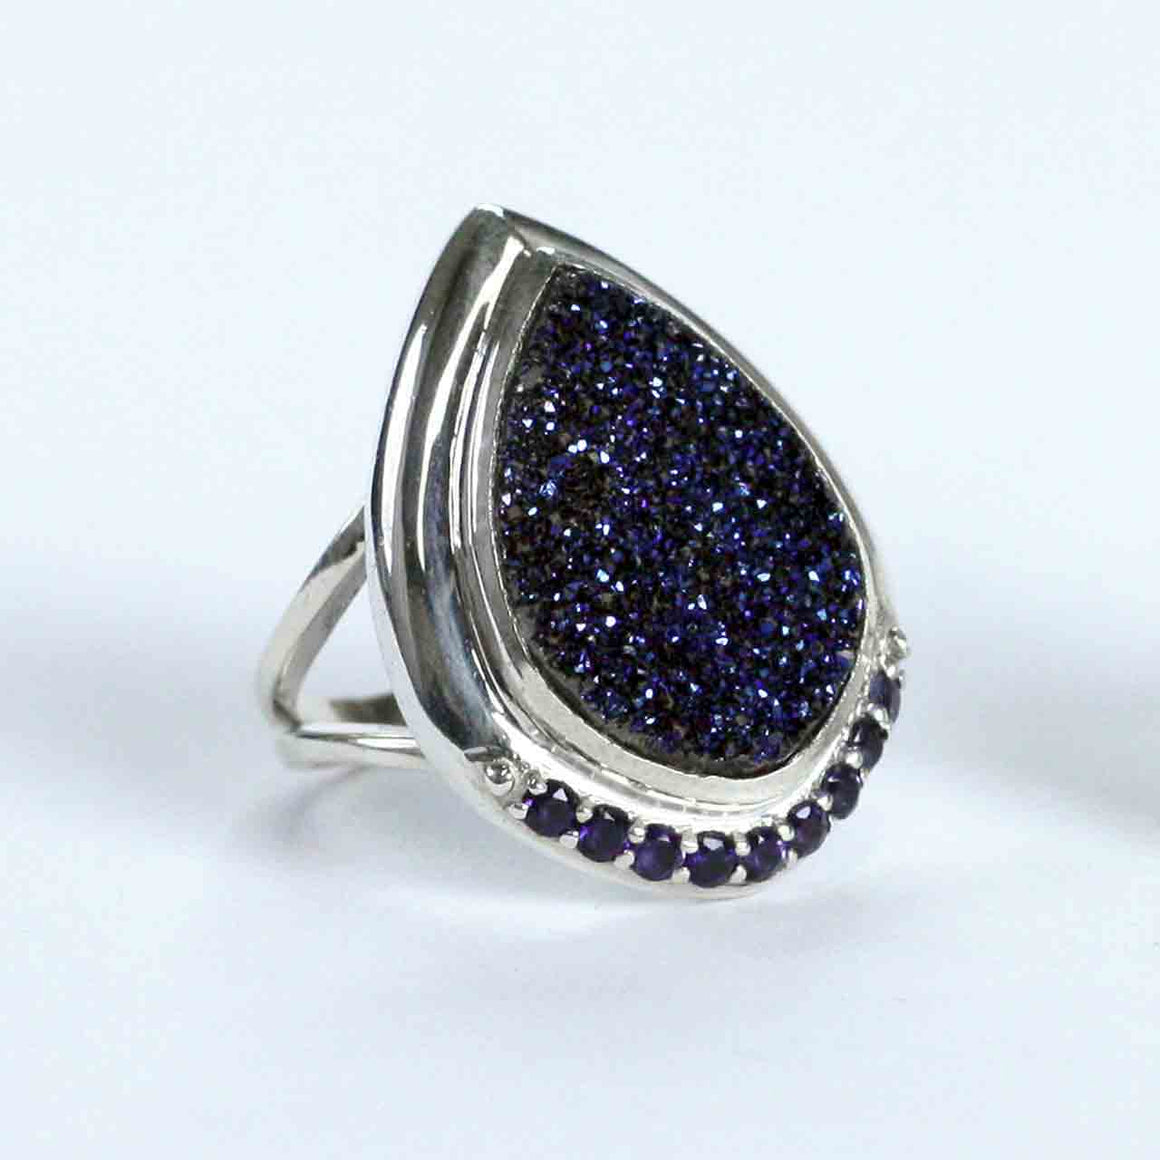 Blue Drusy and Iolite Ring